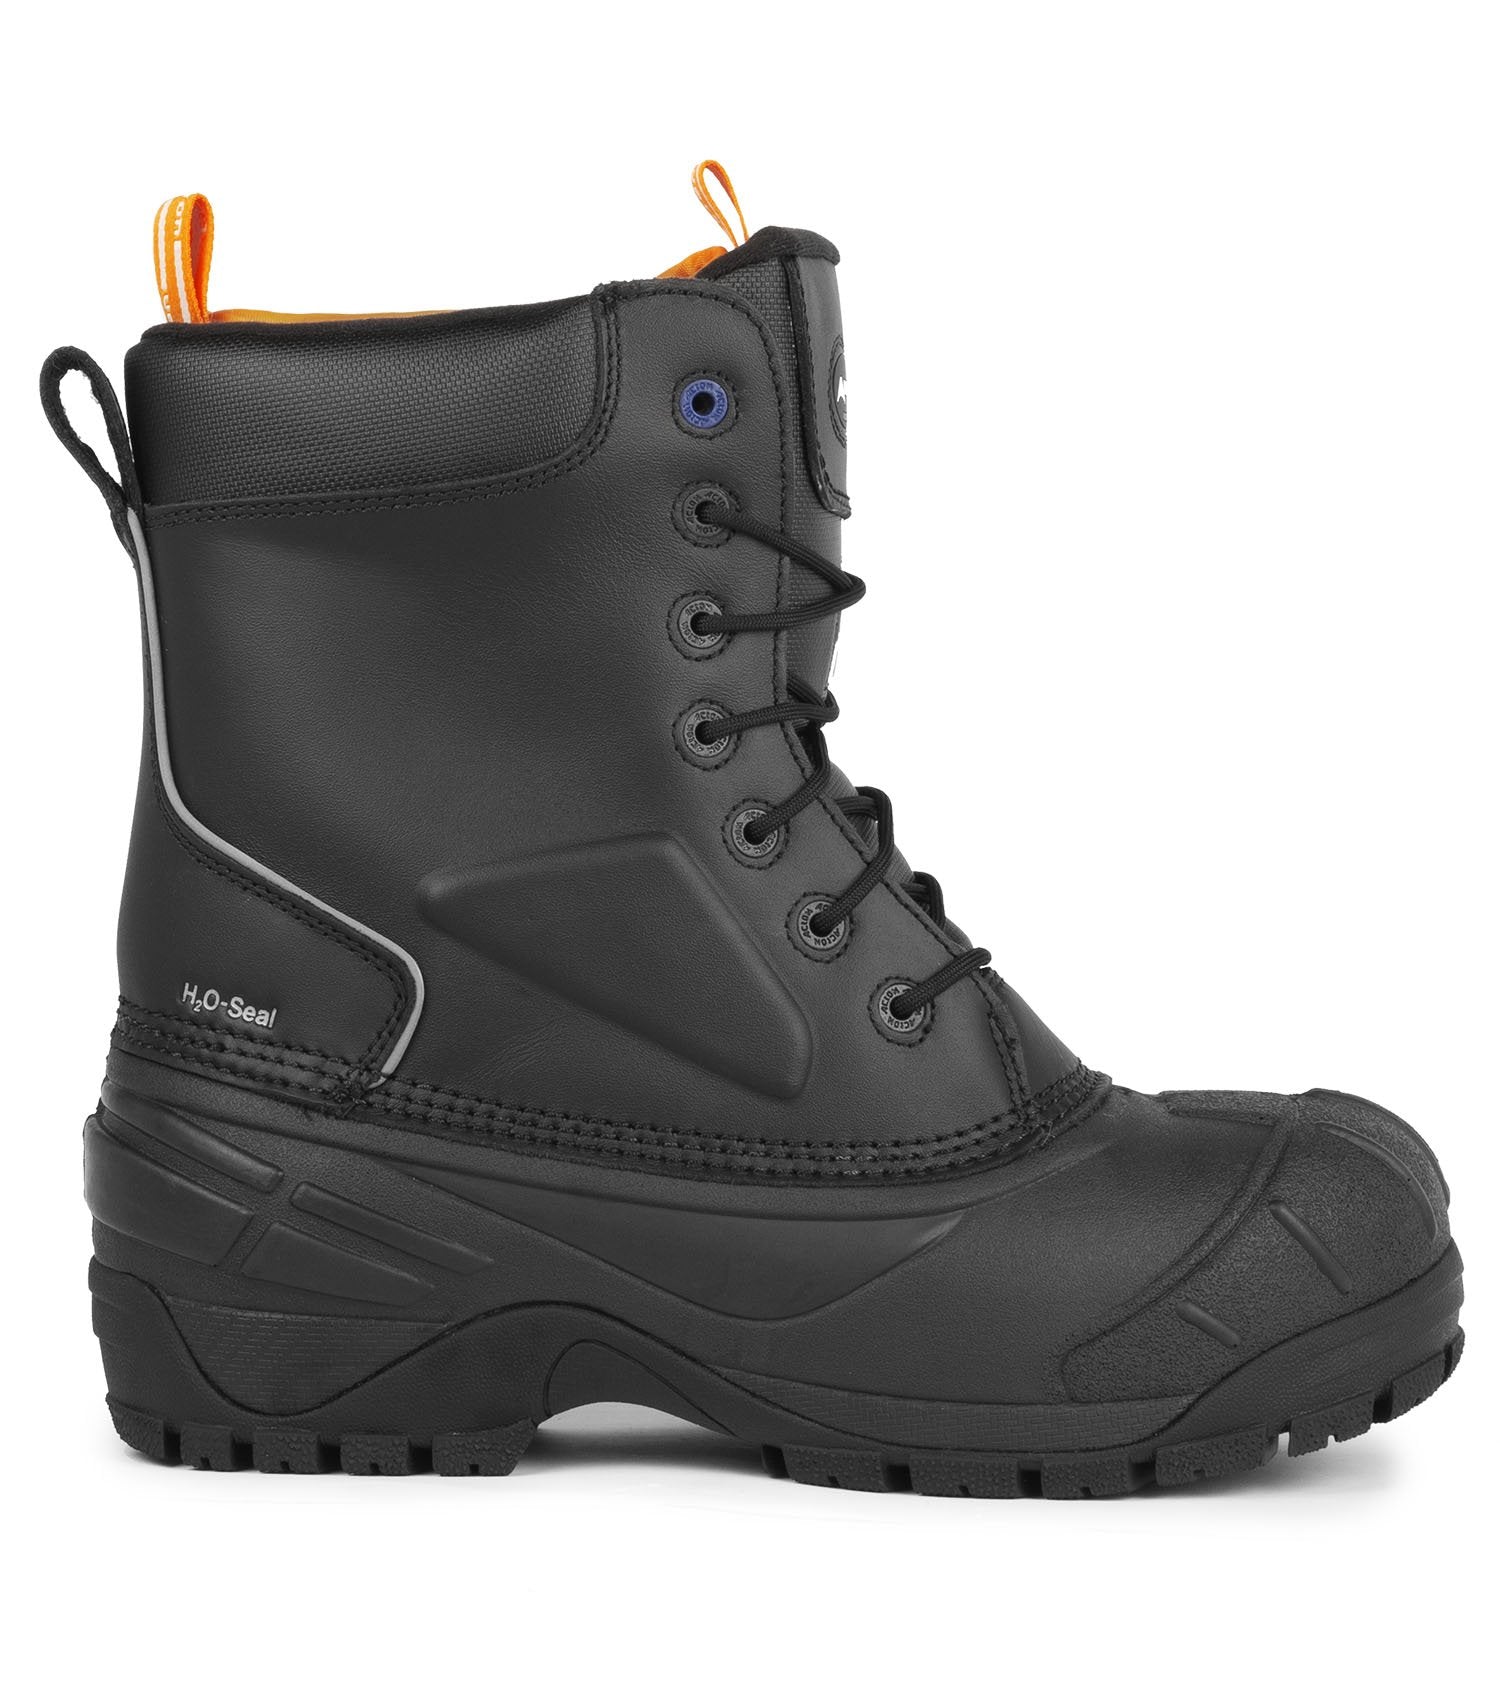 Acton Winterforce Men's 11" Composite Toe Winter Safety Work Boots | -75°C/-103°F Rated | Sizes 4 - 14 Work Boots - Cleanflow